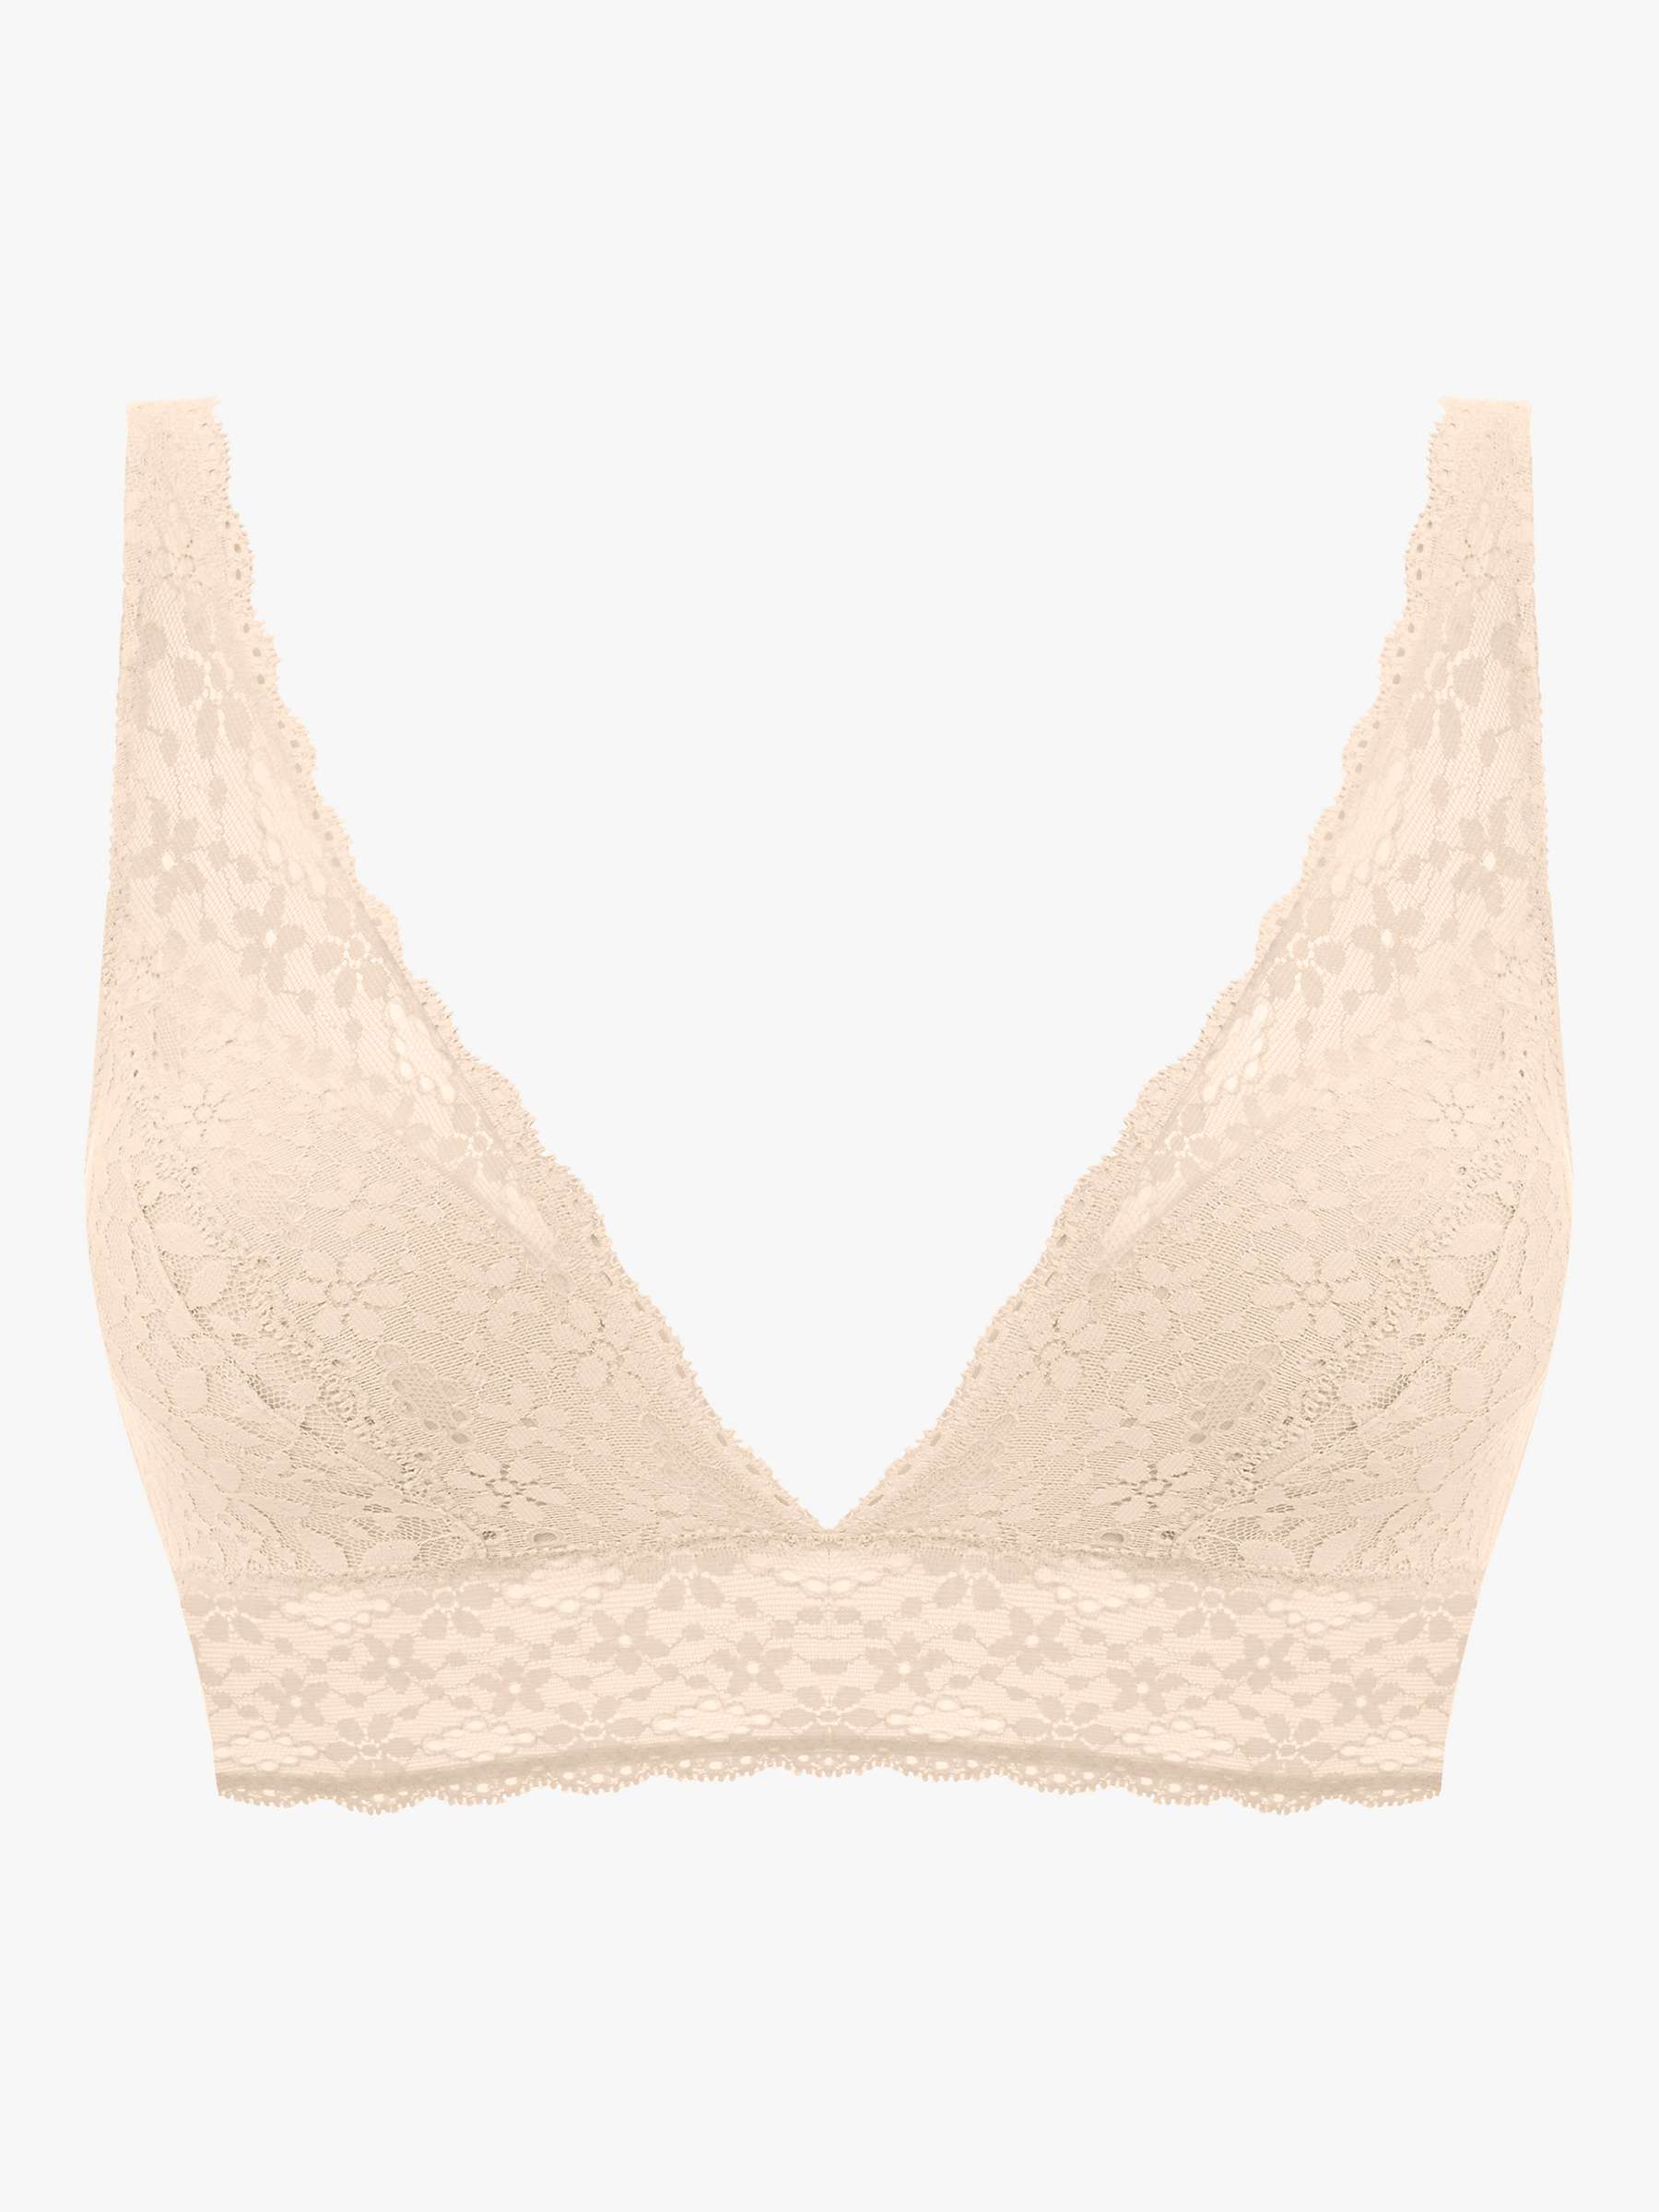 Buy Wacoal Halo Lace Non Wired Bralette Online at johnlewis.com